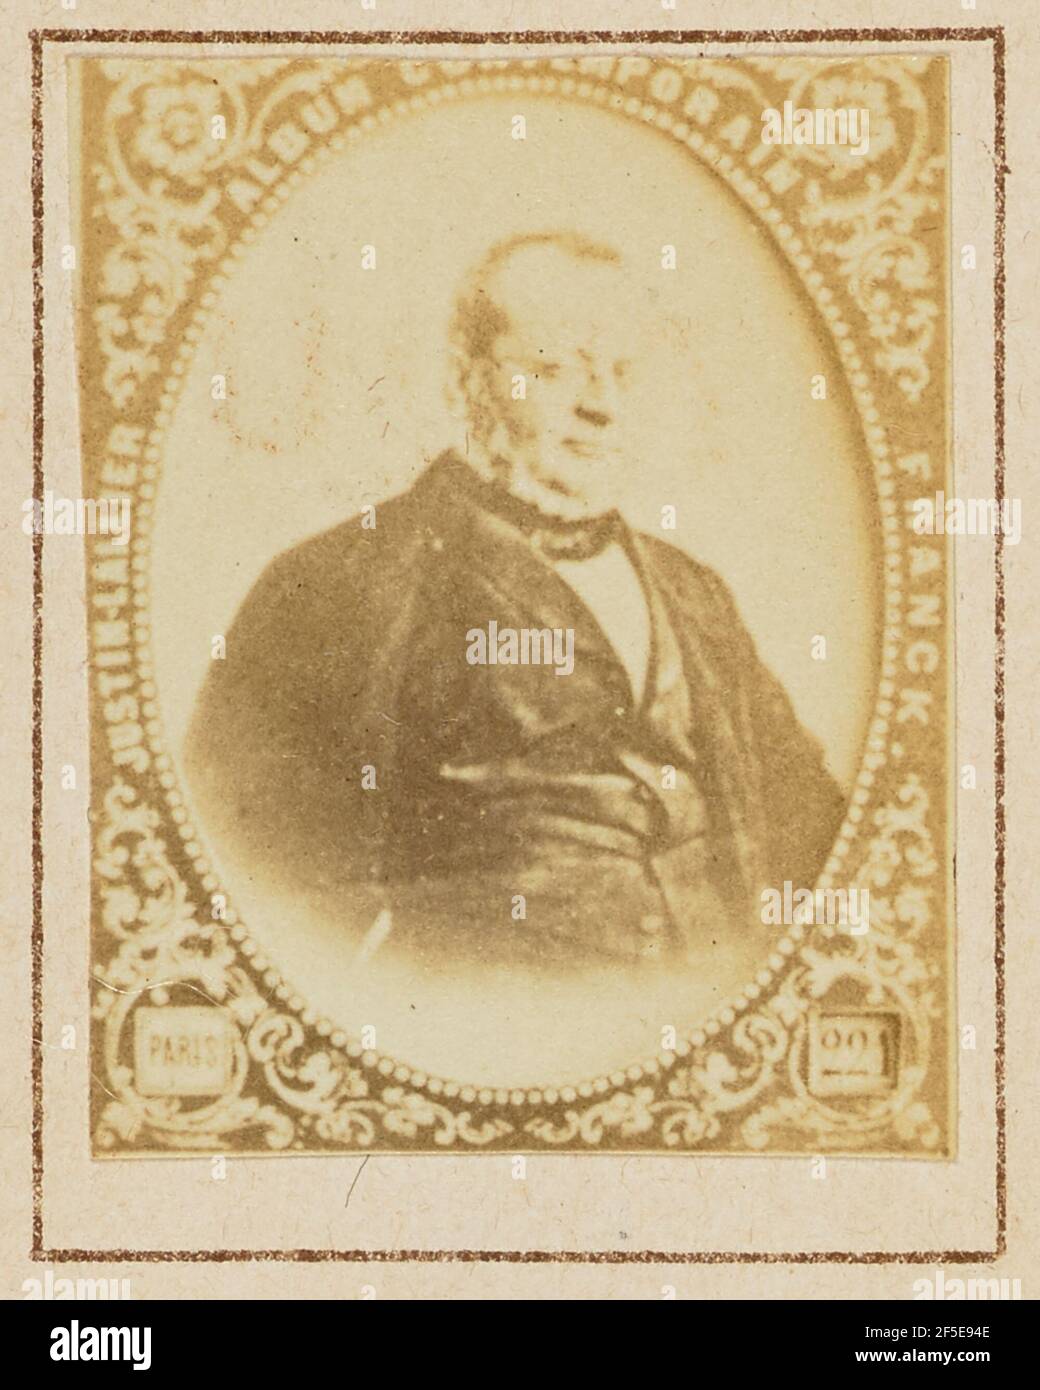 Camillo Benso, Count of Cavour. Stock Photo